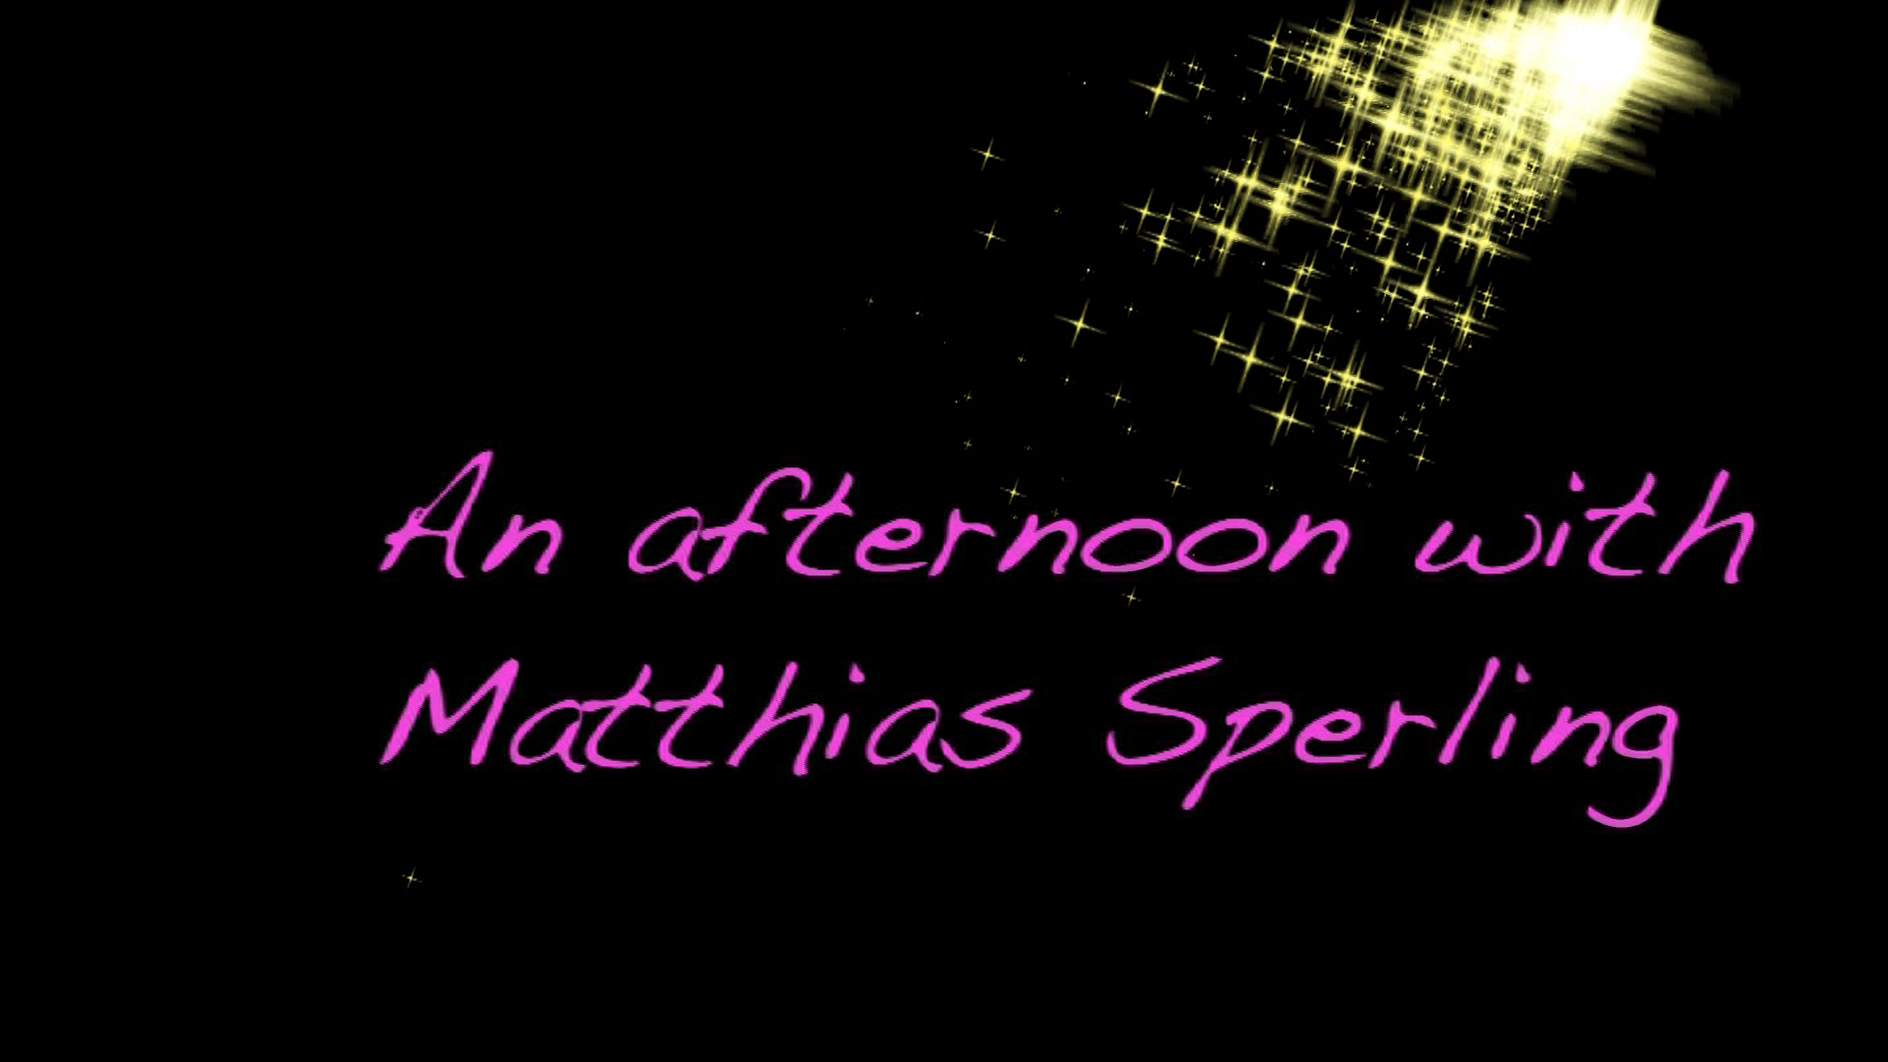 An Afternoon With Matthias Sperling